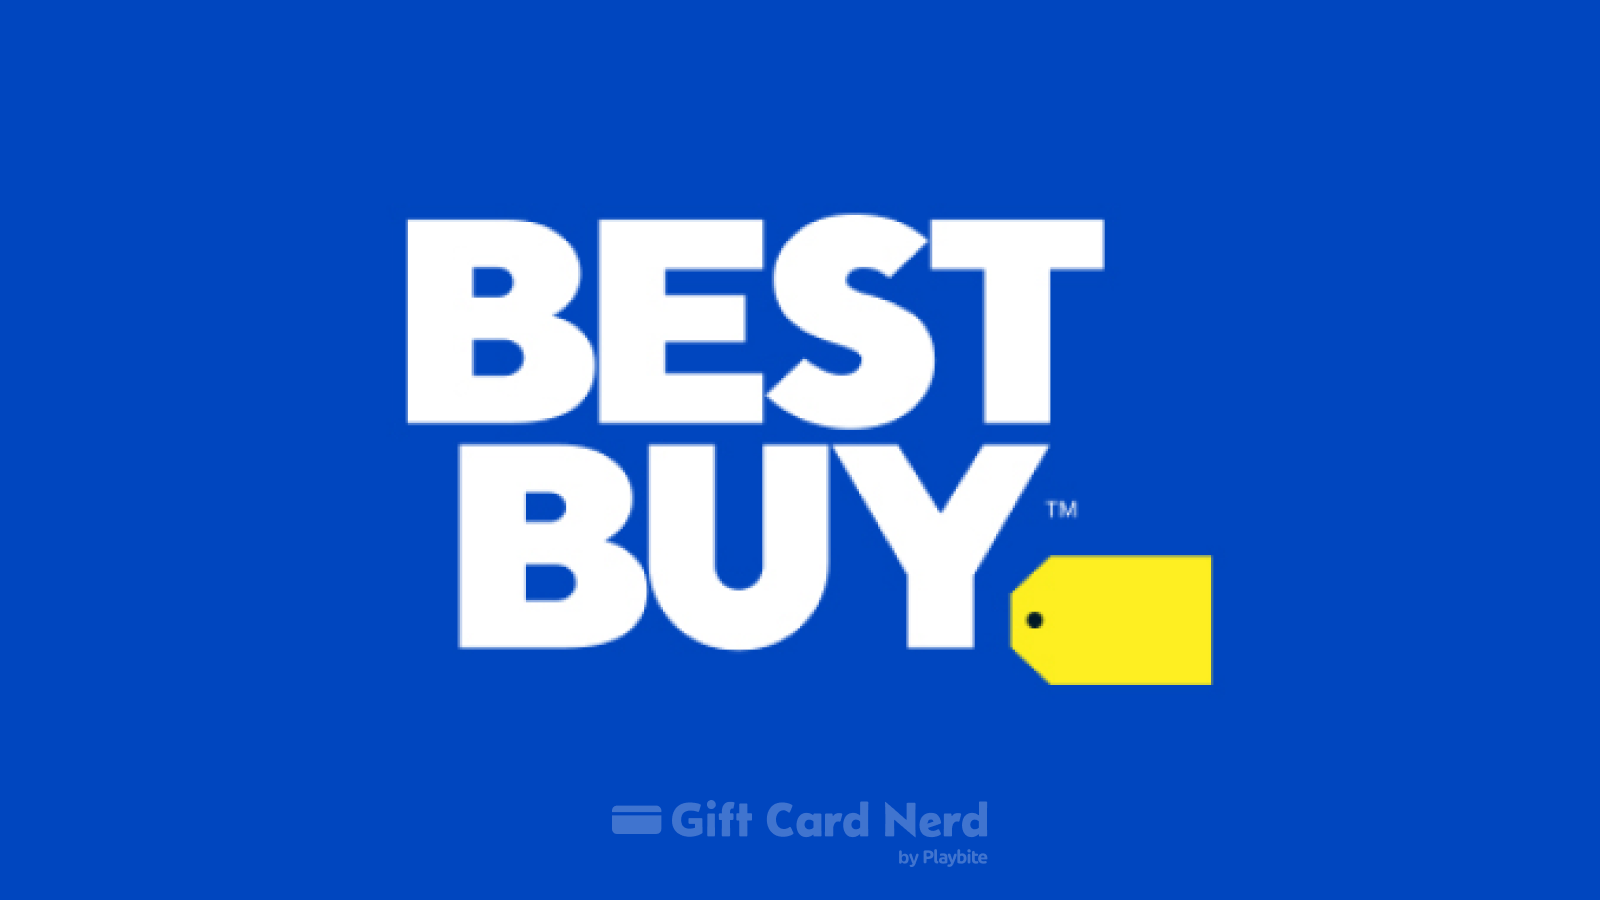 Does Target Sell Best Buy Gift Cards?